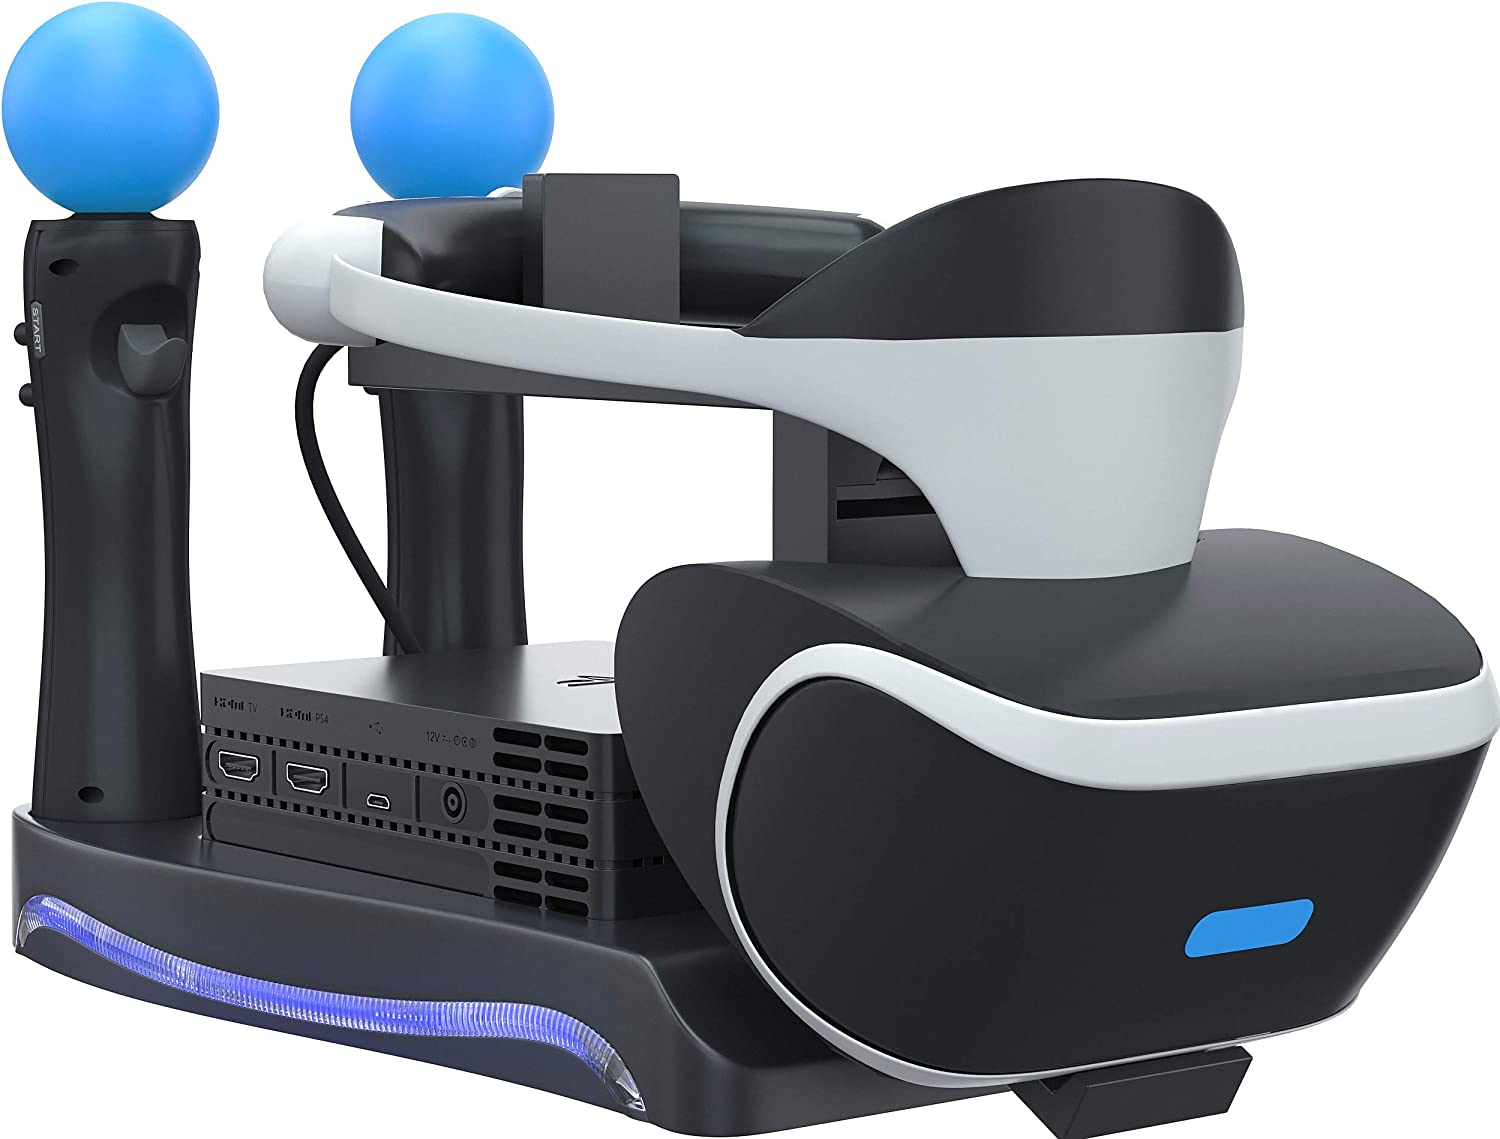 Skywin PSVR Stand - Charge, Showcase, and Display Your PS4 VR 